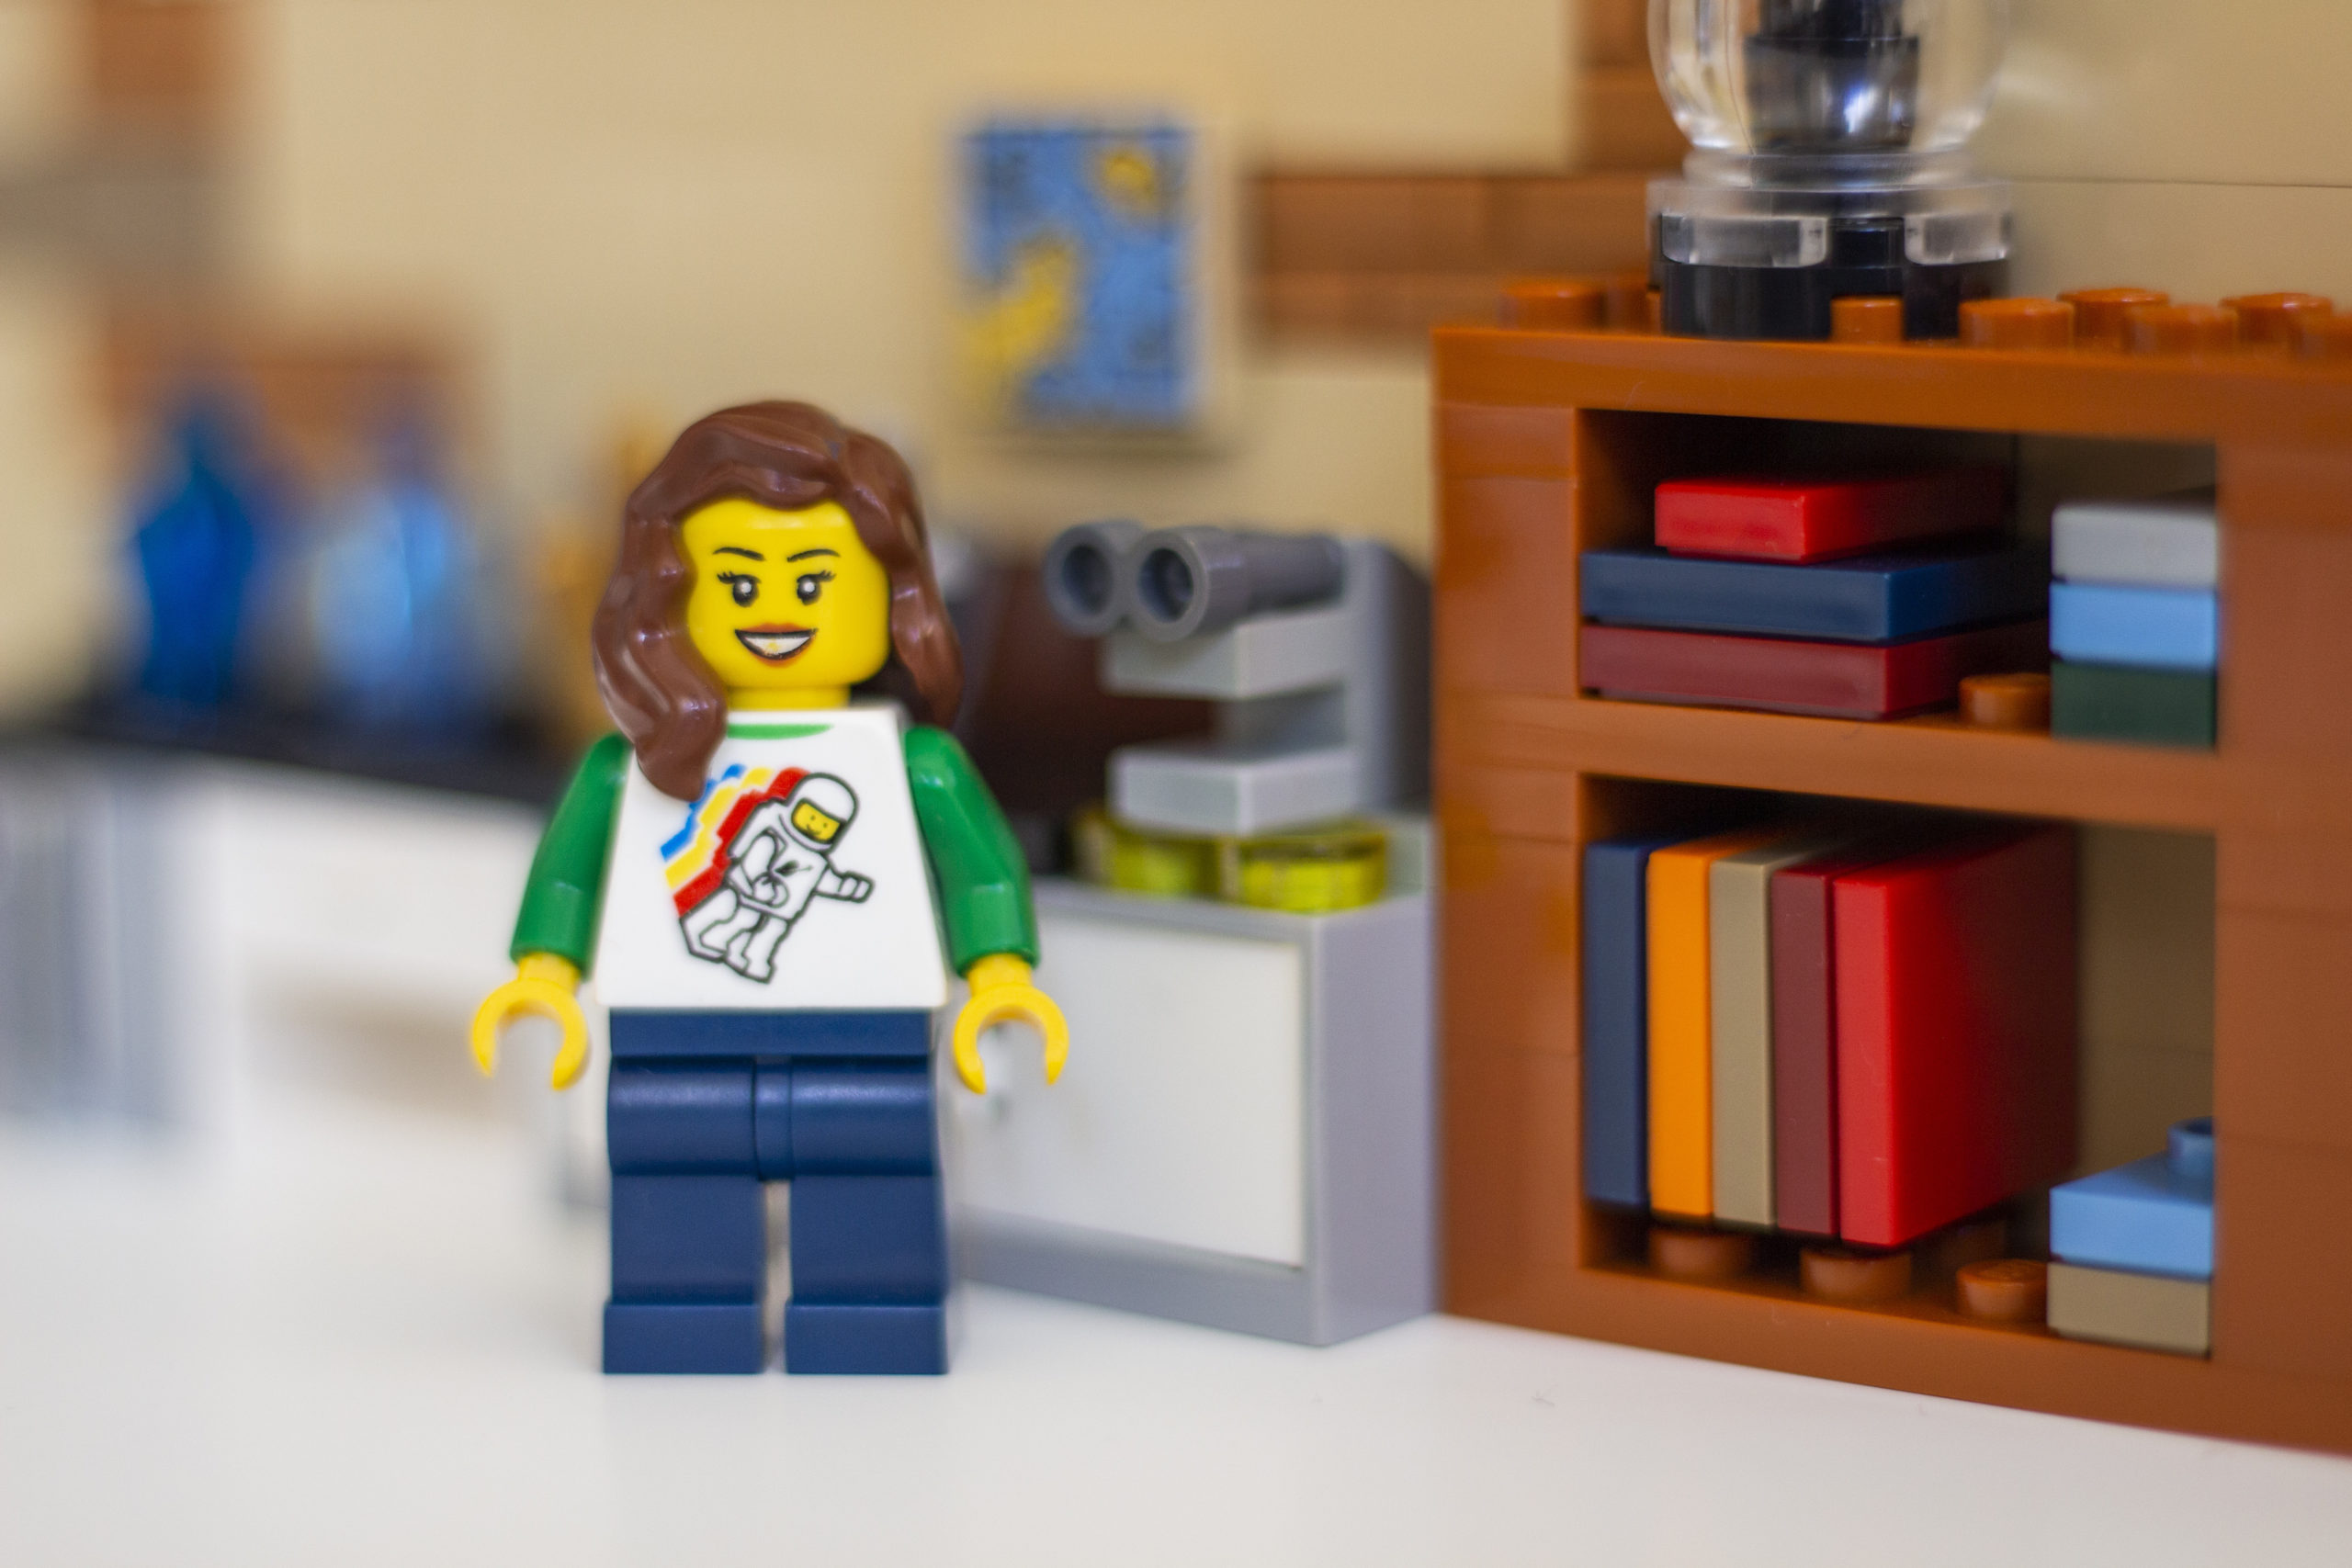 LEGO Researcher in the Lab. Photo by Stacy Phillips.